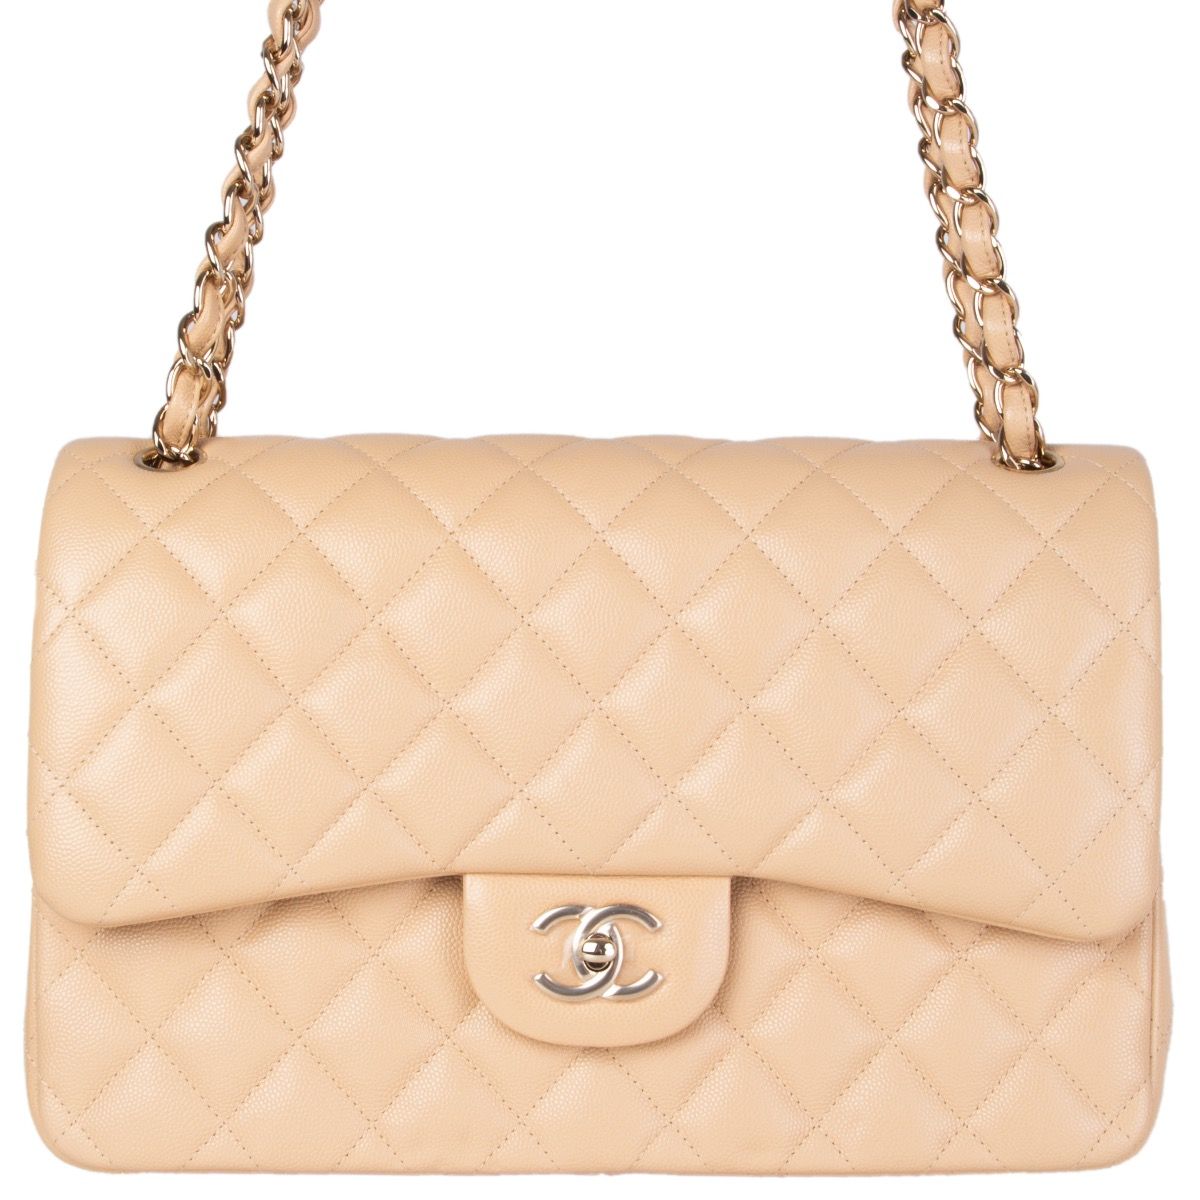 how much is chanel large classic flap bag